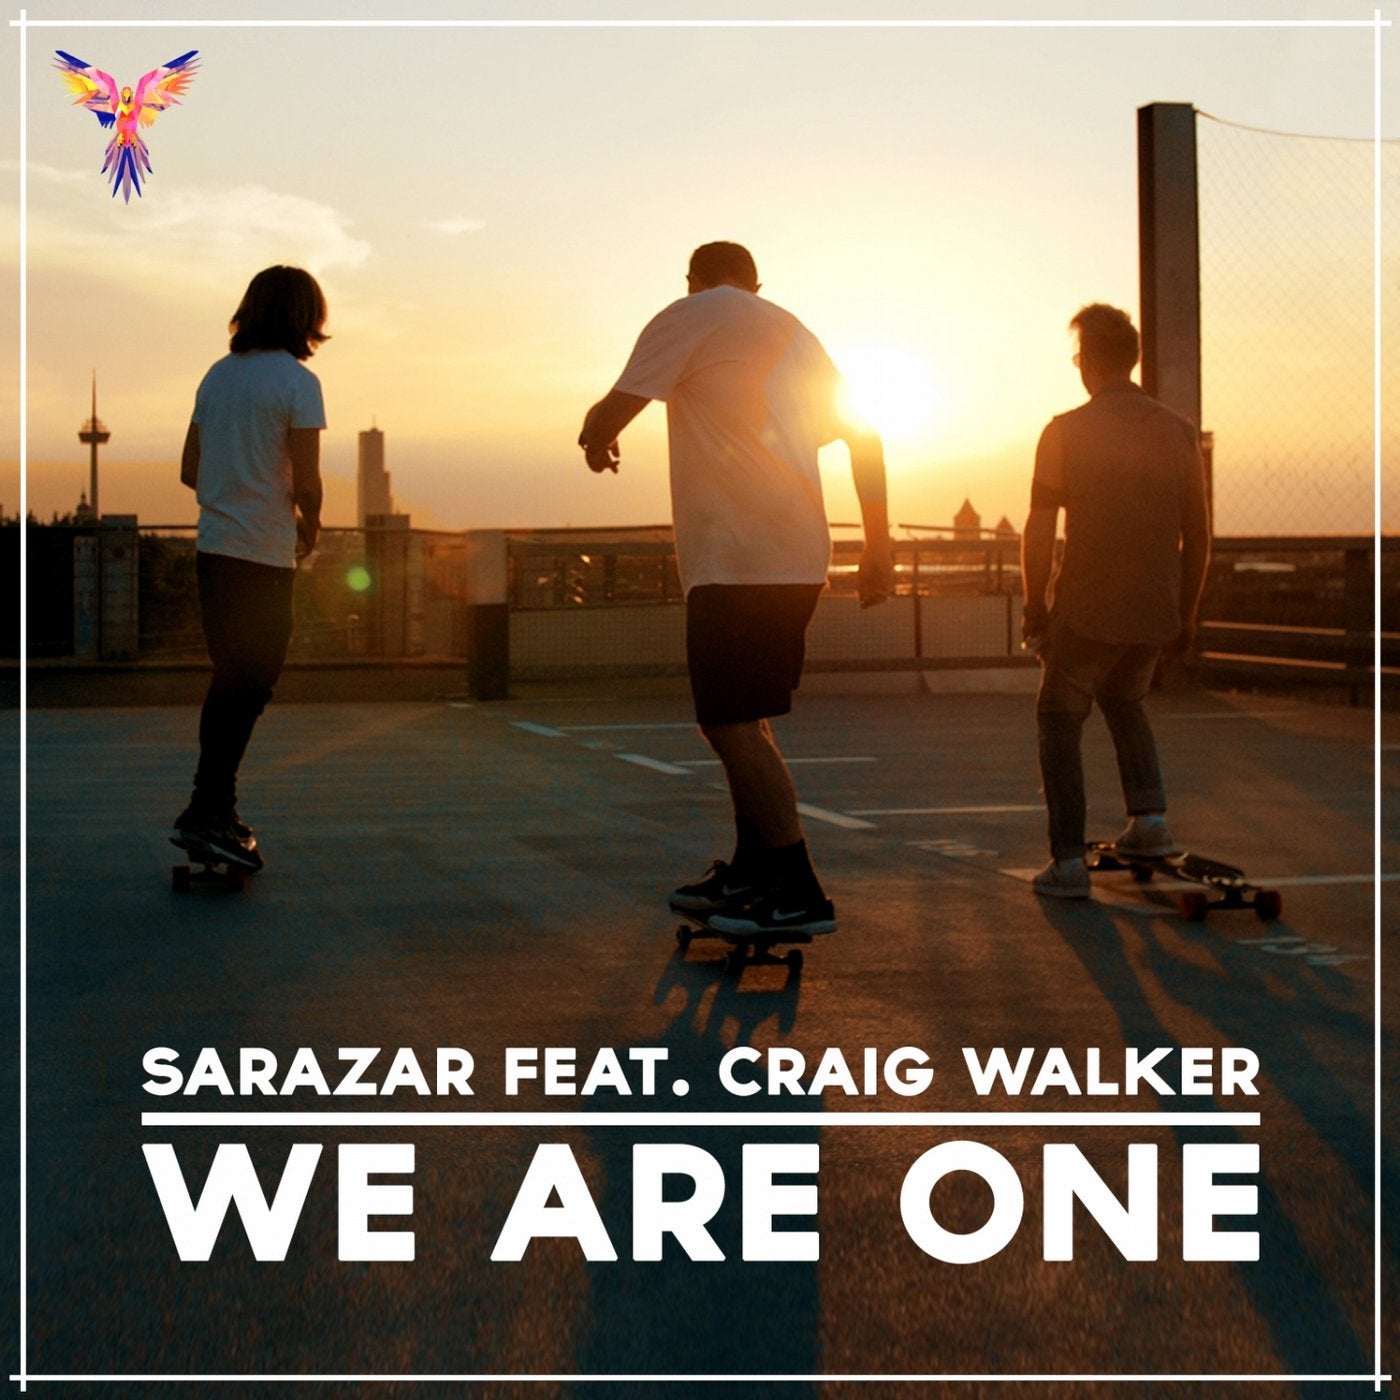 We Are One (feat. Craig Walker)